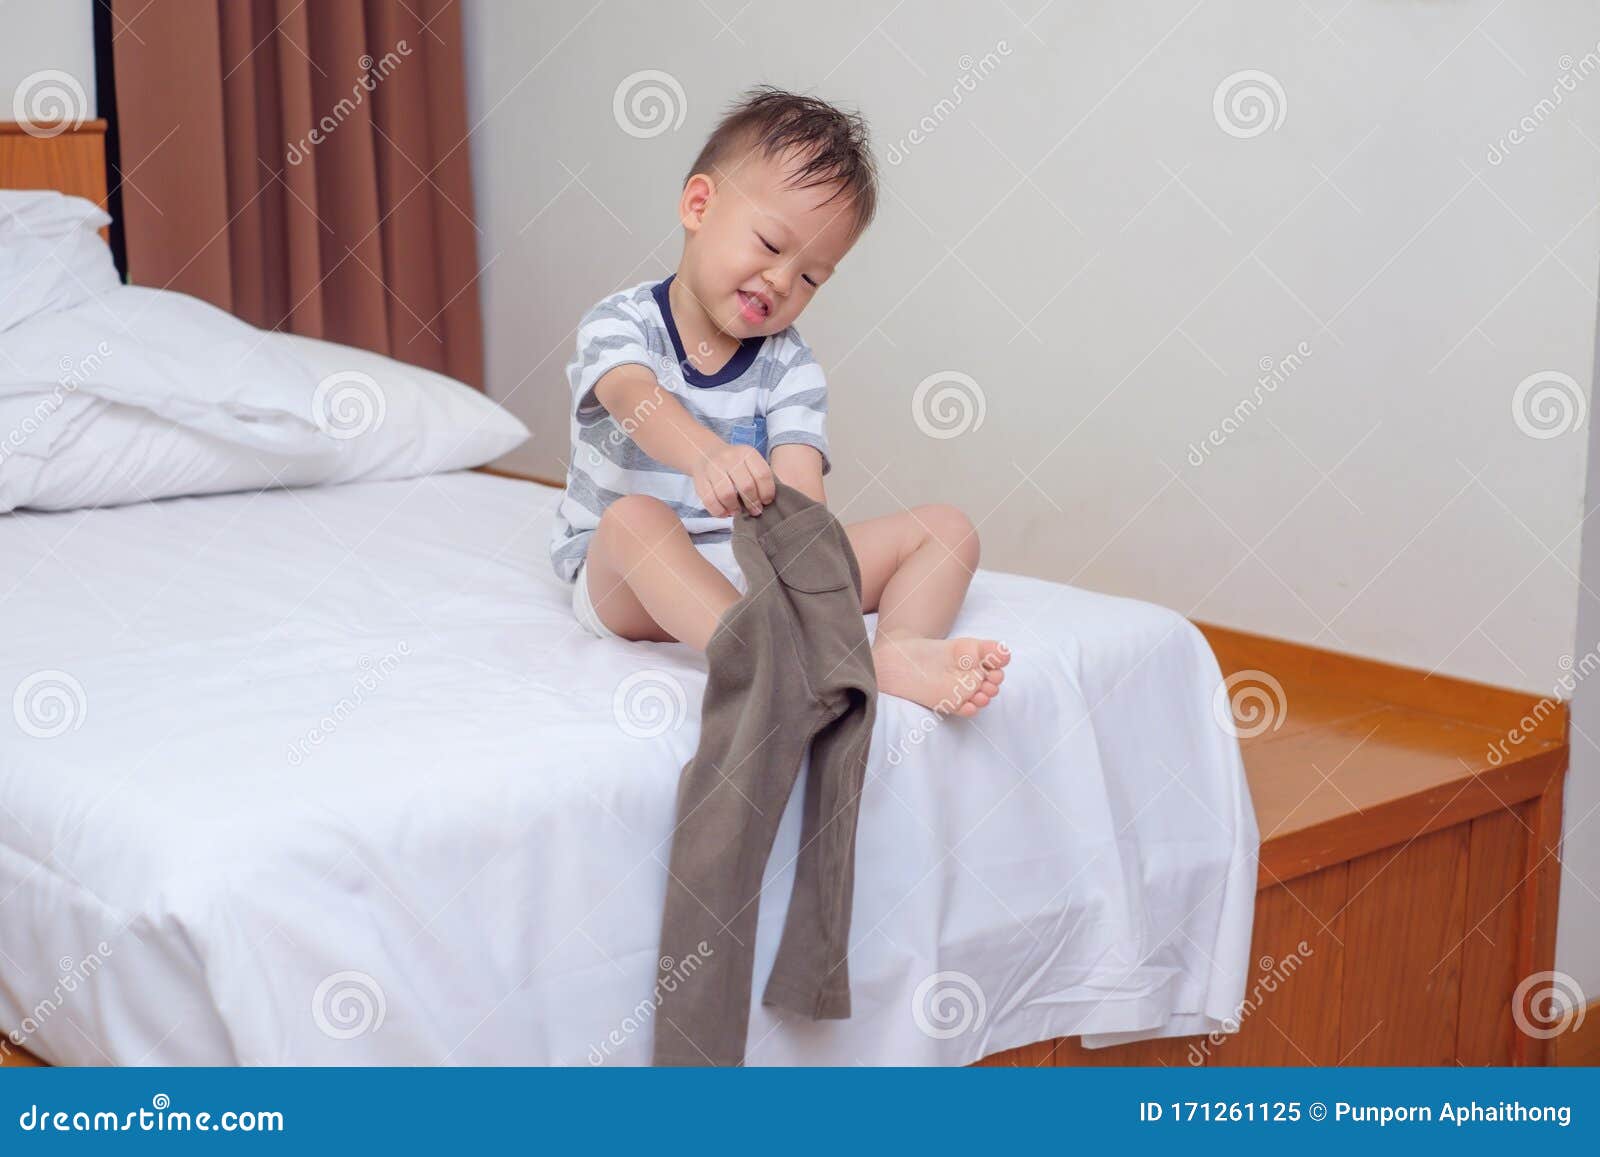 cute smiling little asian 2 years old toddler boy child sitting in bed concentrate on putting on his pants